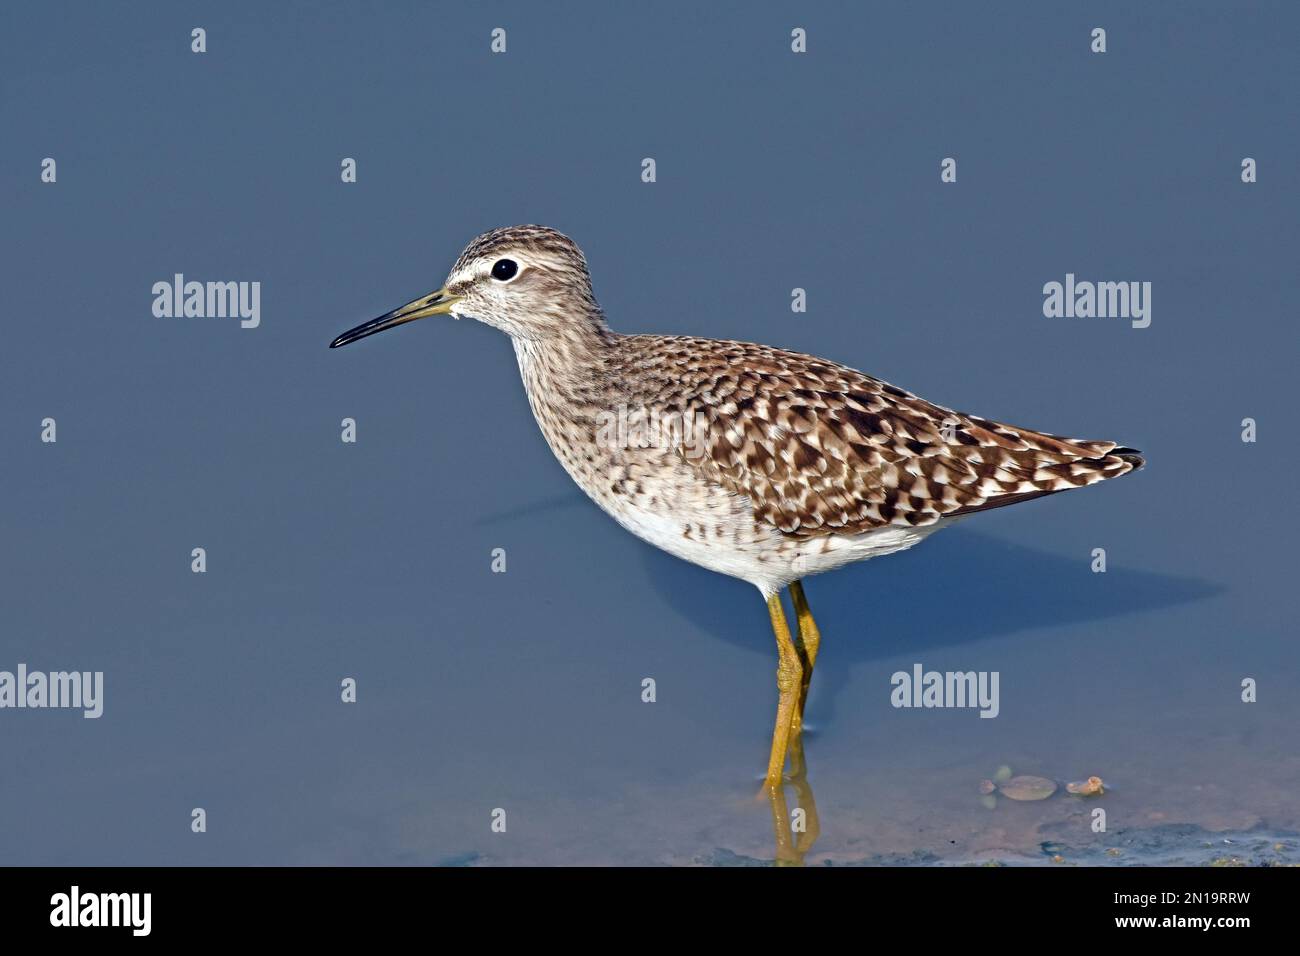 Wood sandpiper stand in shallow water Stock Photo